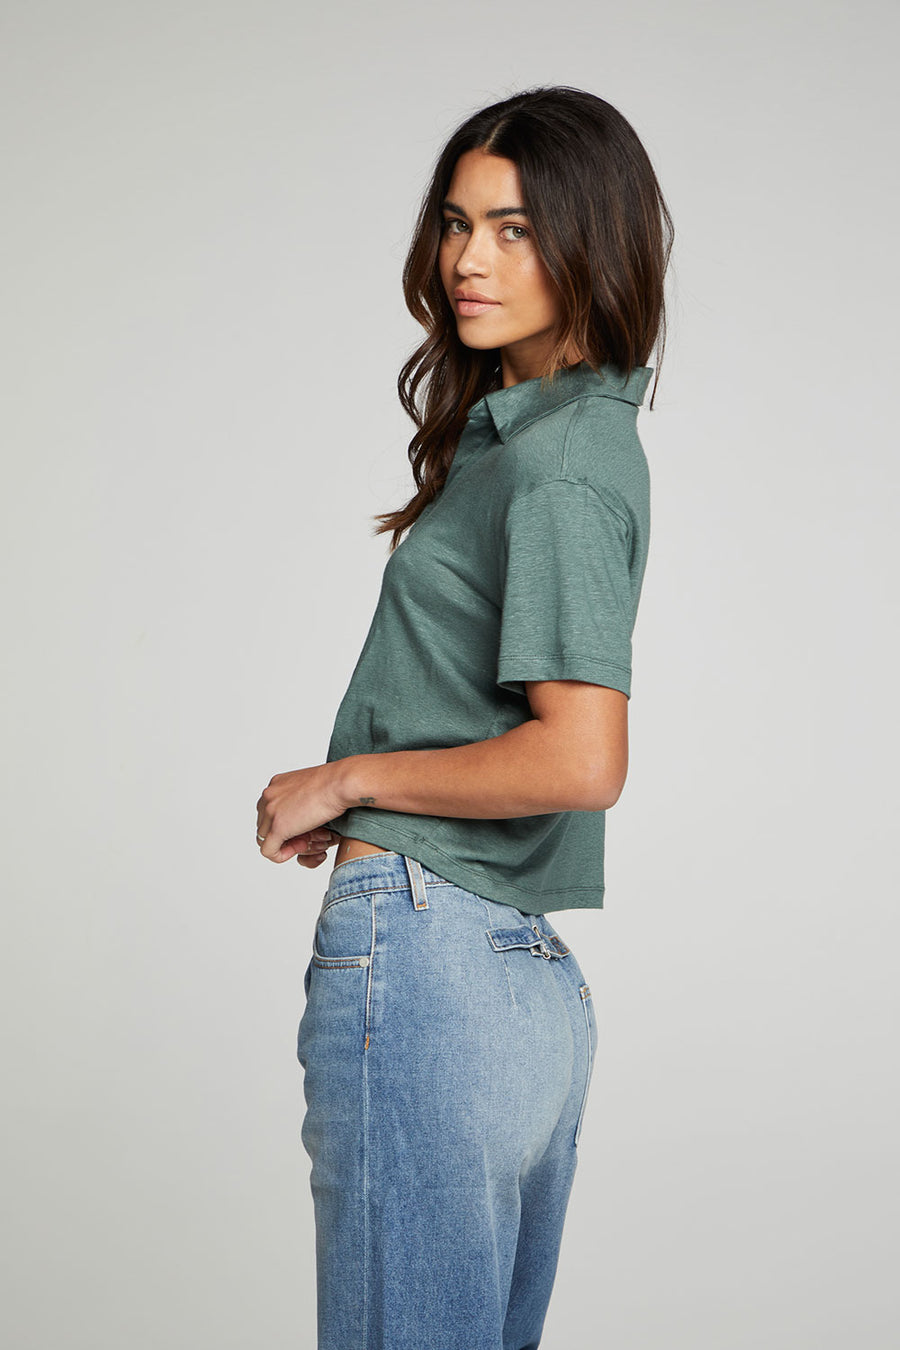 Cropped Polo Boxy Short Sleeved Tee WOMENS chaserbrand